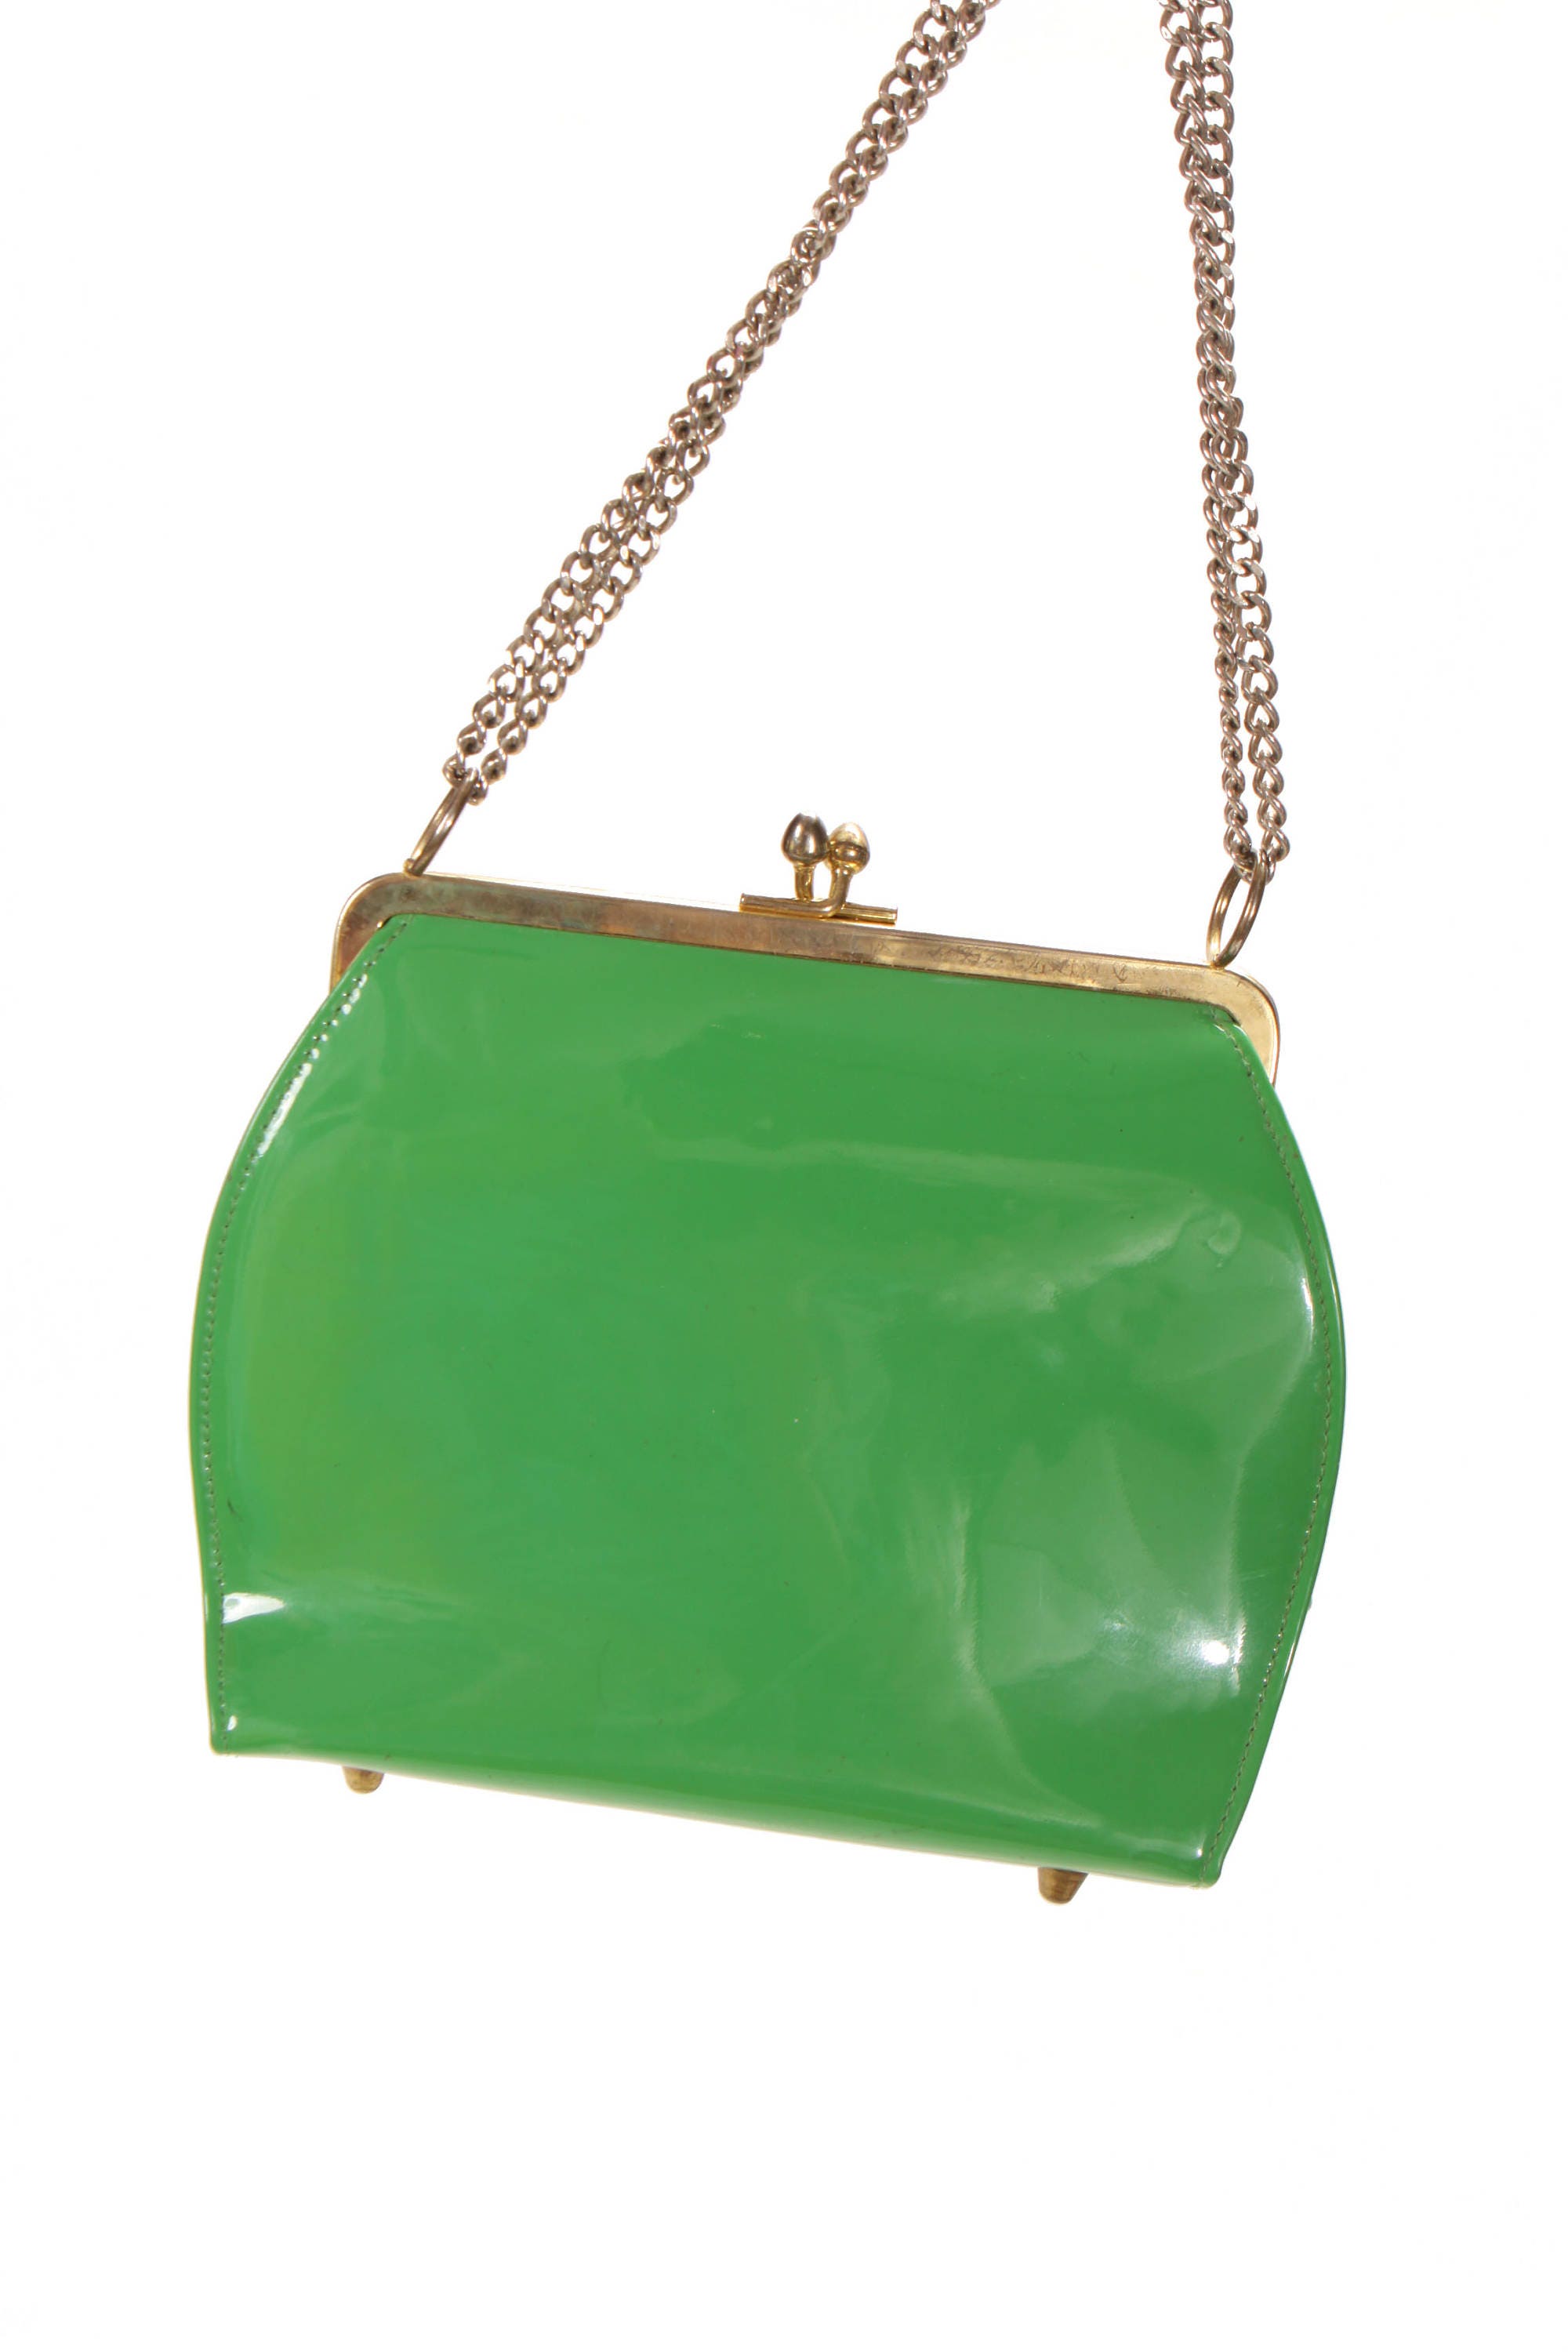 1950s Green Shiny Vinyl Mini Clutch with Metal Chain Strap Purse by Theodor